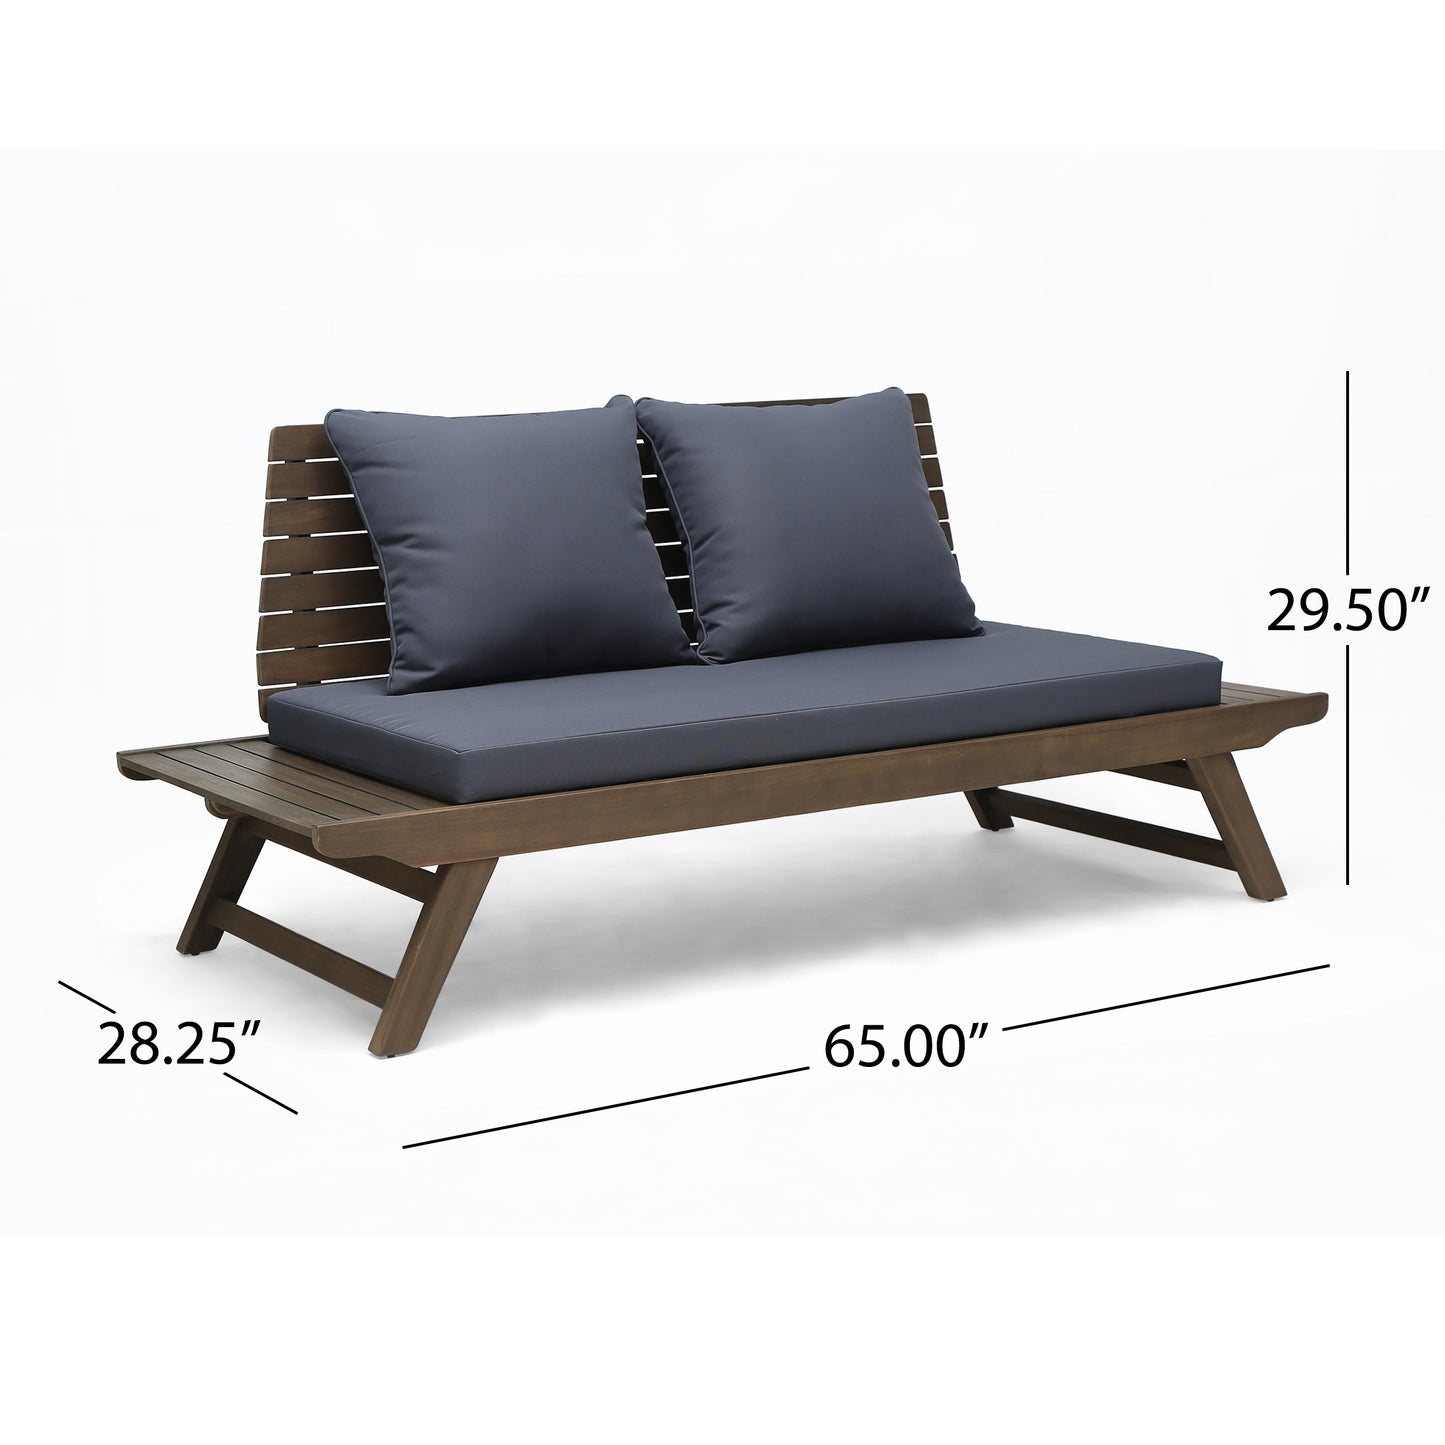 Kailee Outdoor Wooden Loveseat with Cushions, Dark Gray and Gray Finish